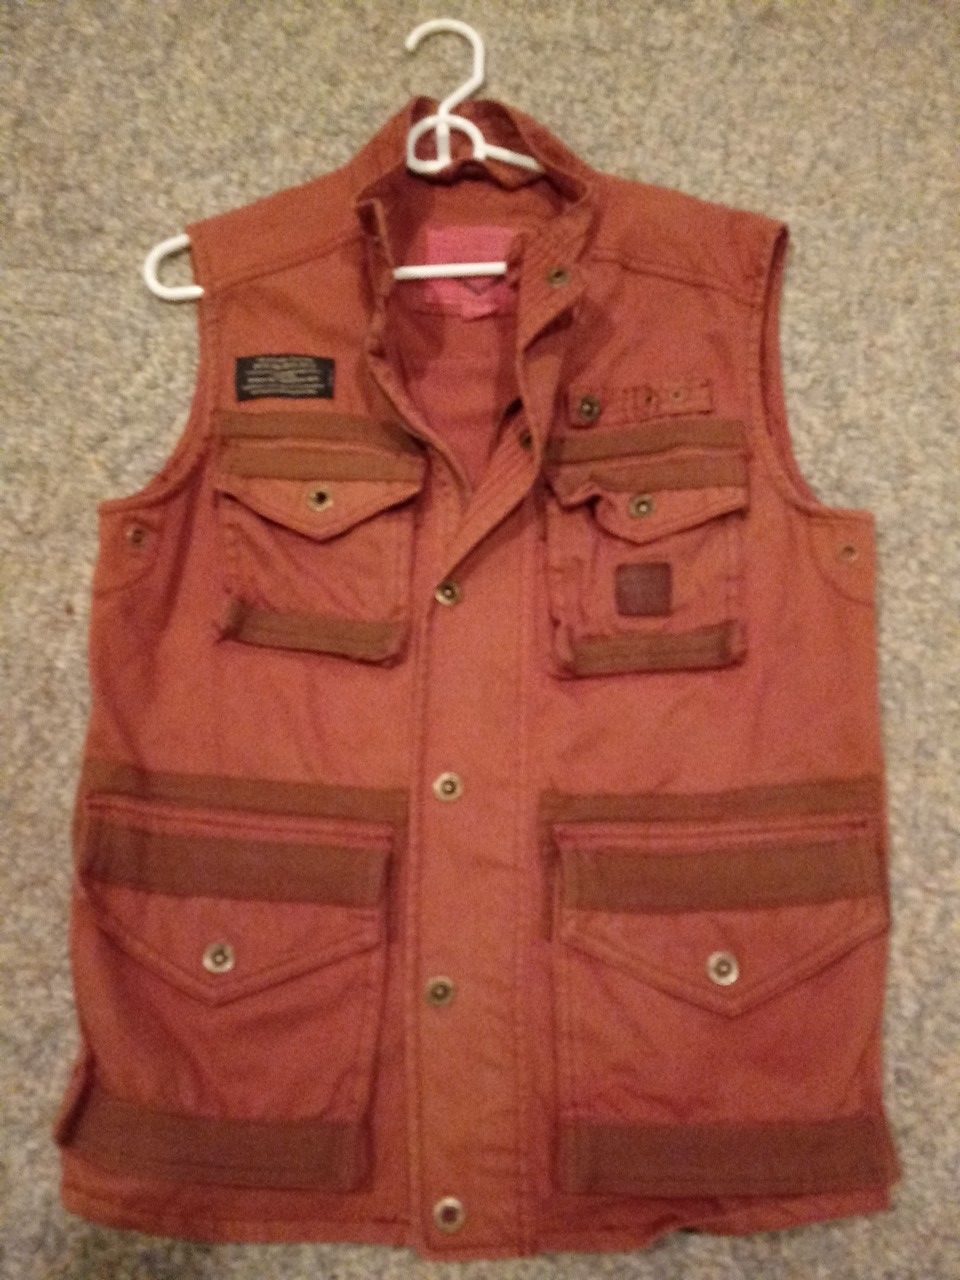 FISHING VEST zips an snaps closed